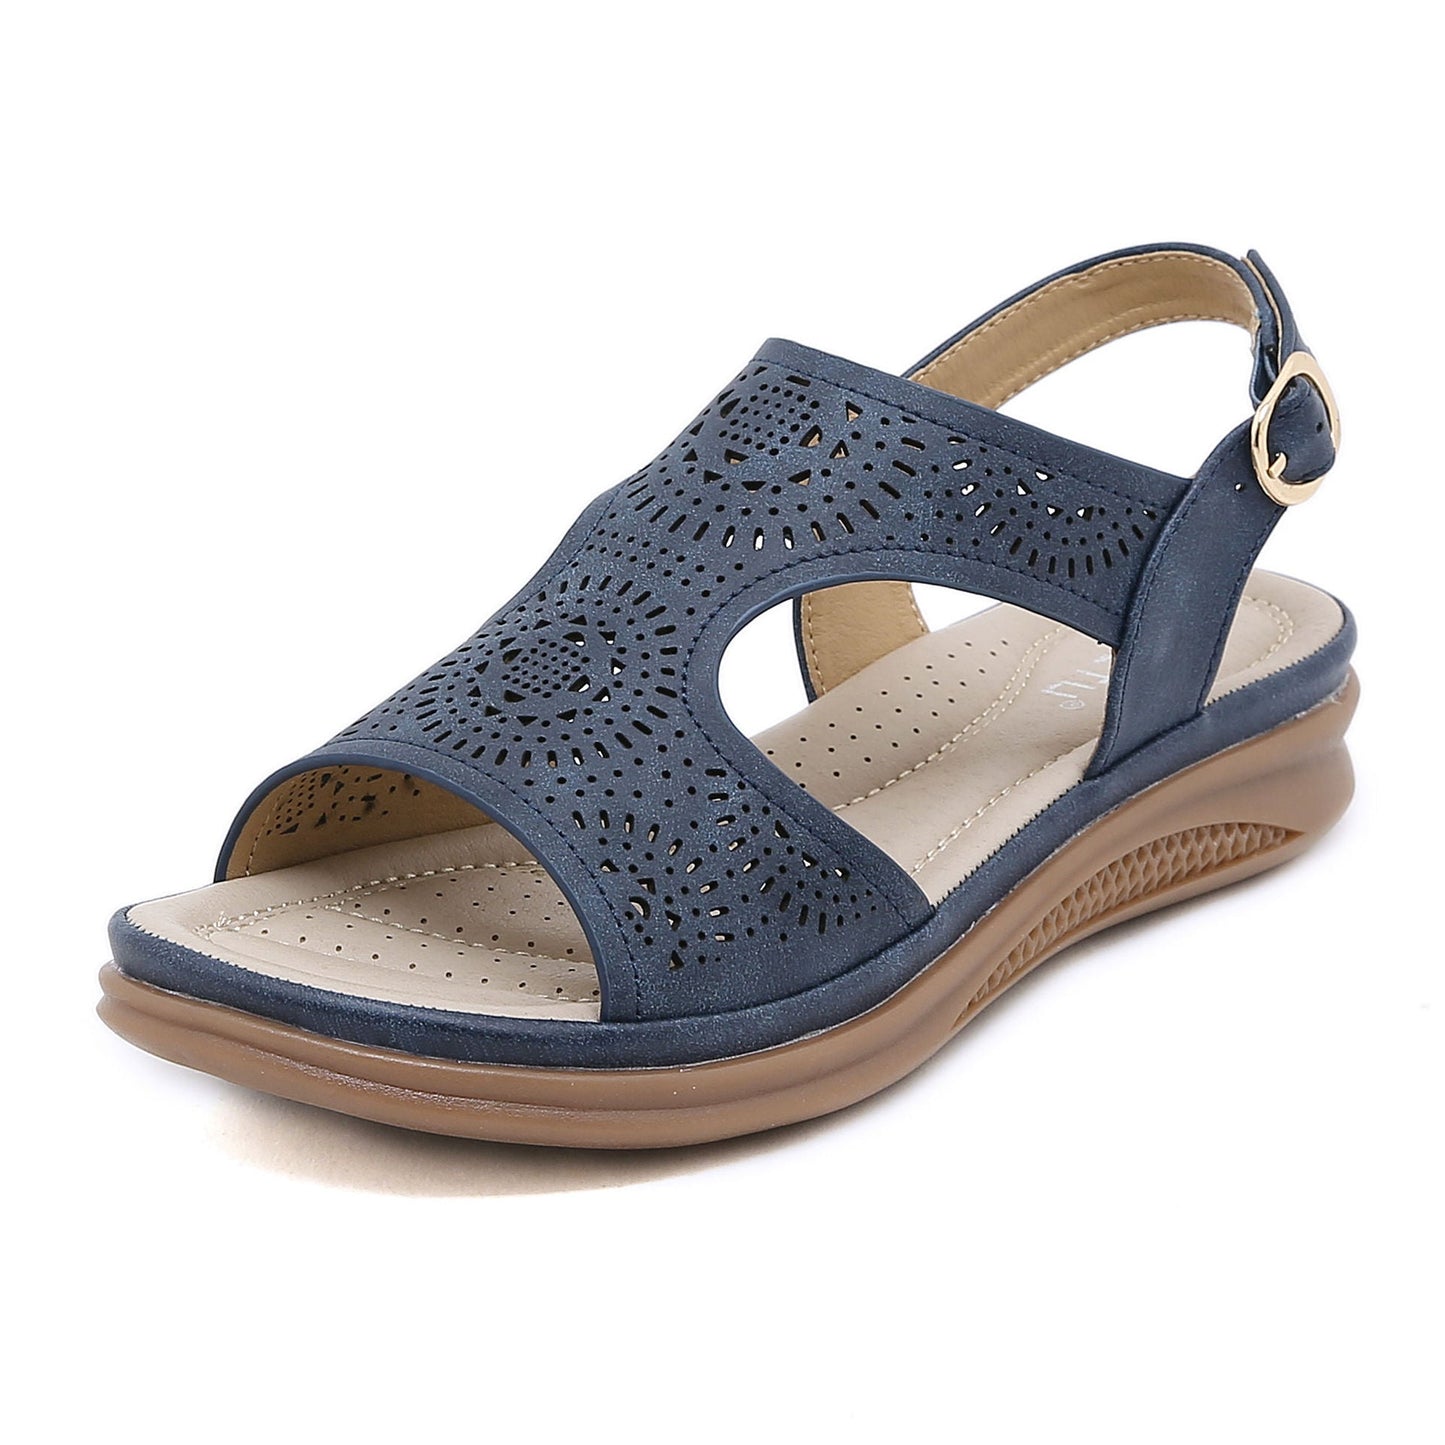 Casual Lightweight  Comfortable Sandals